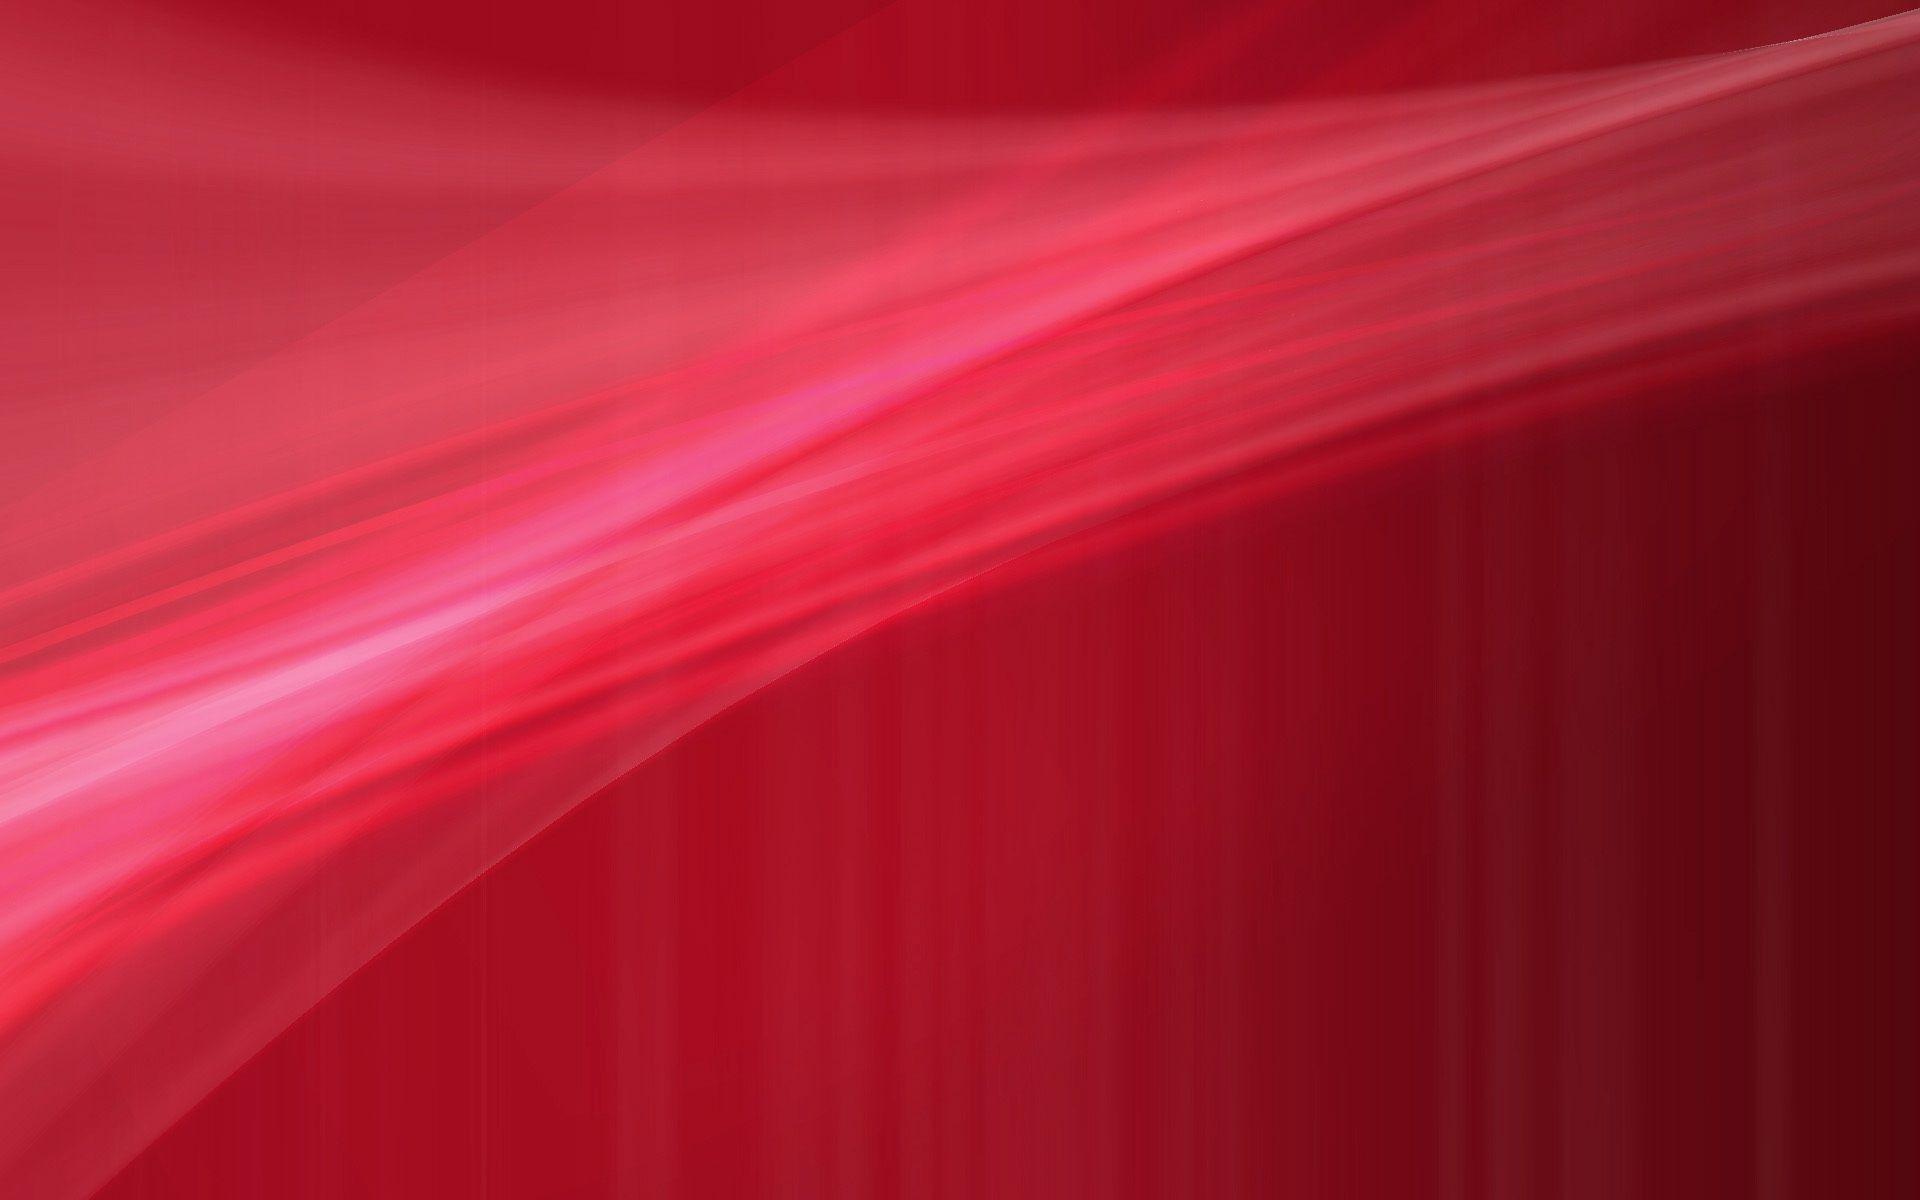 Red In Abstract Wallpaper 37560 Hi Resolution. Best Free JPG